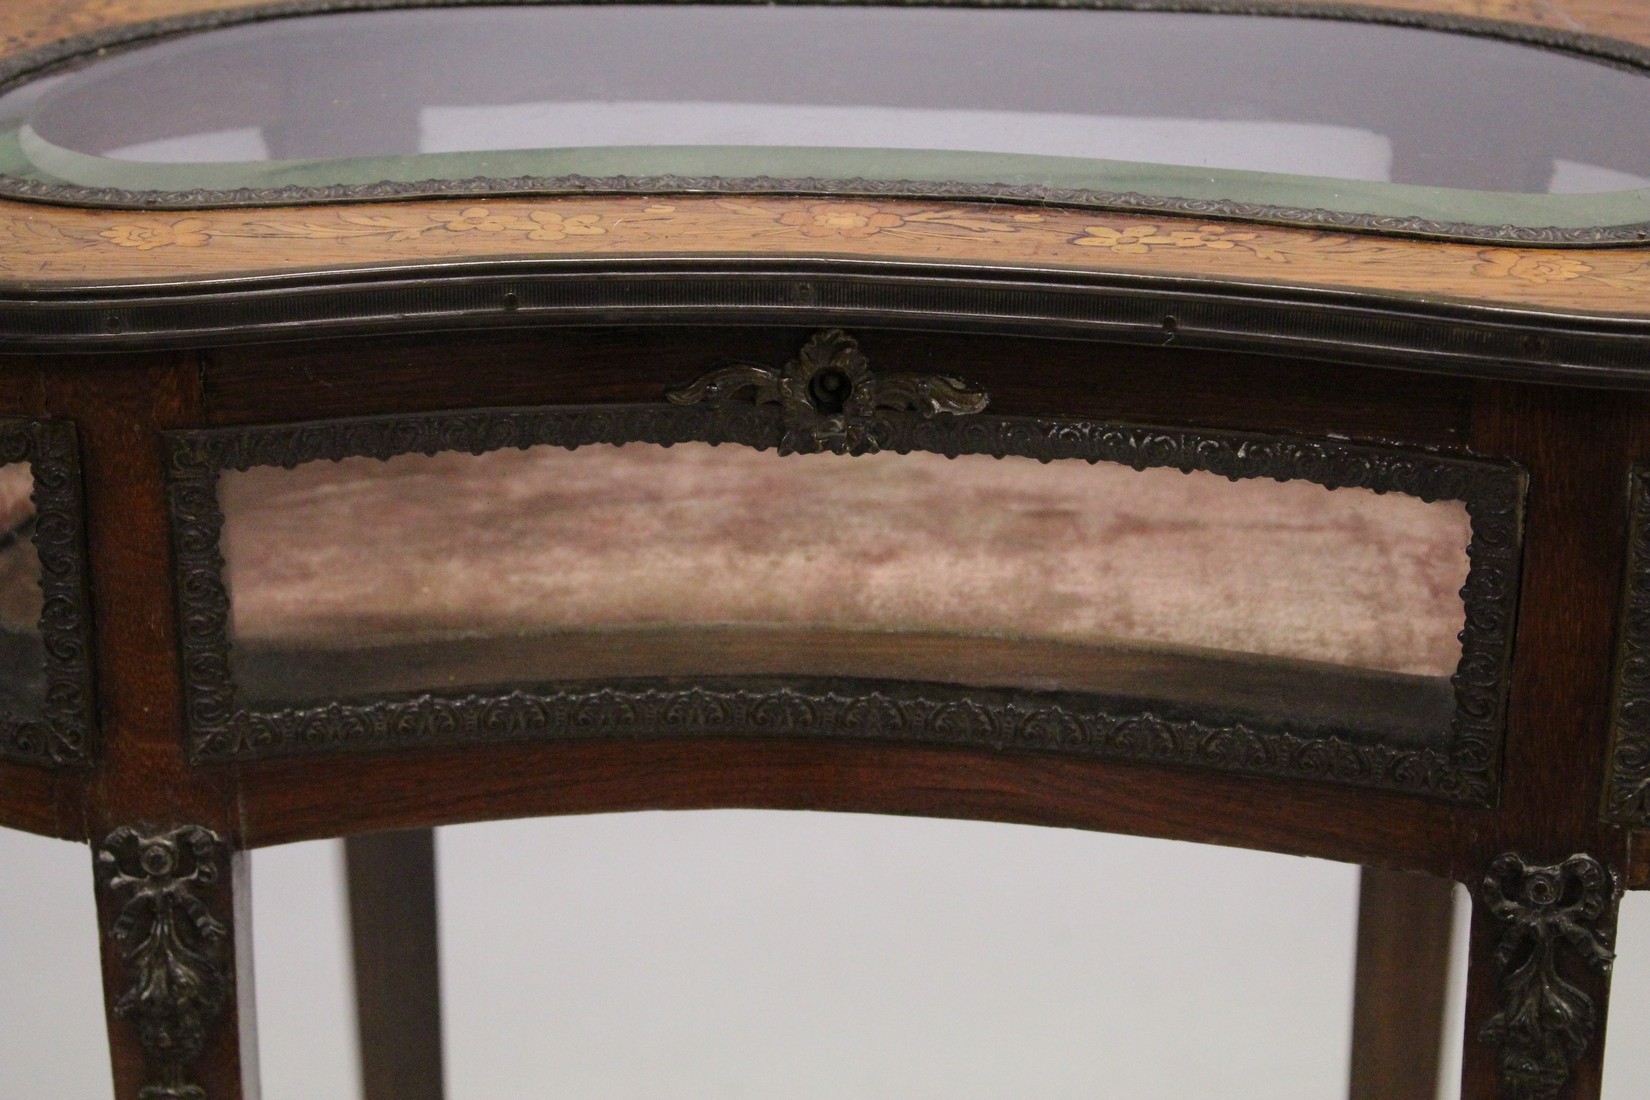 A GOOD 19TH CENTURY FRENCH ROSEWOOD AND MARQUETRY KIDNEY SHAPED BIJOUTERIE TABLE inlaid with - Image 2 of 6